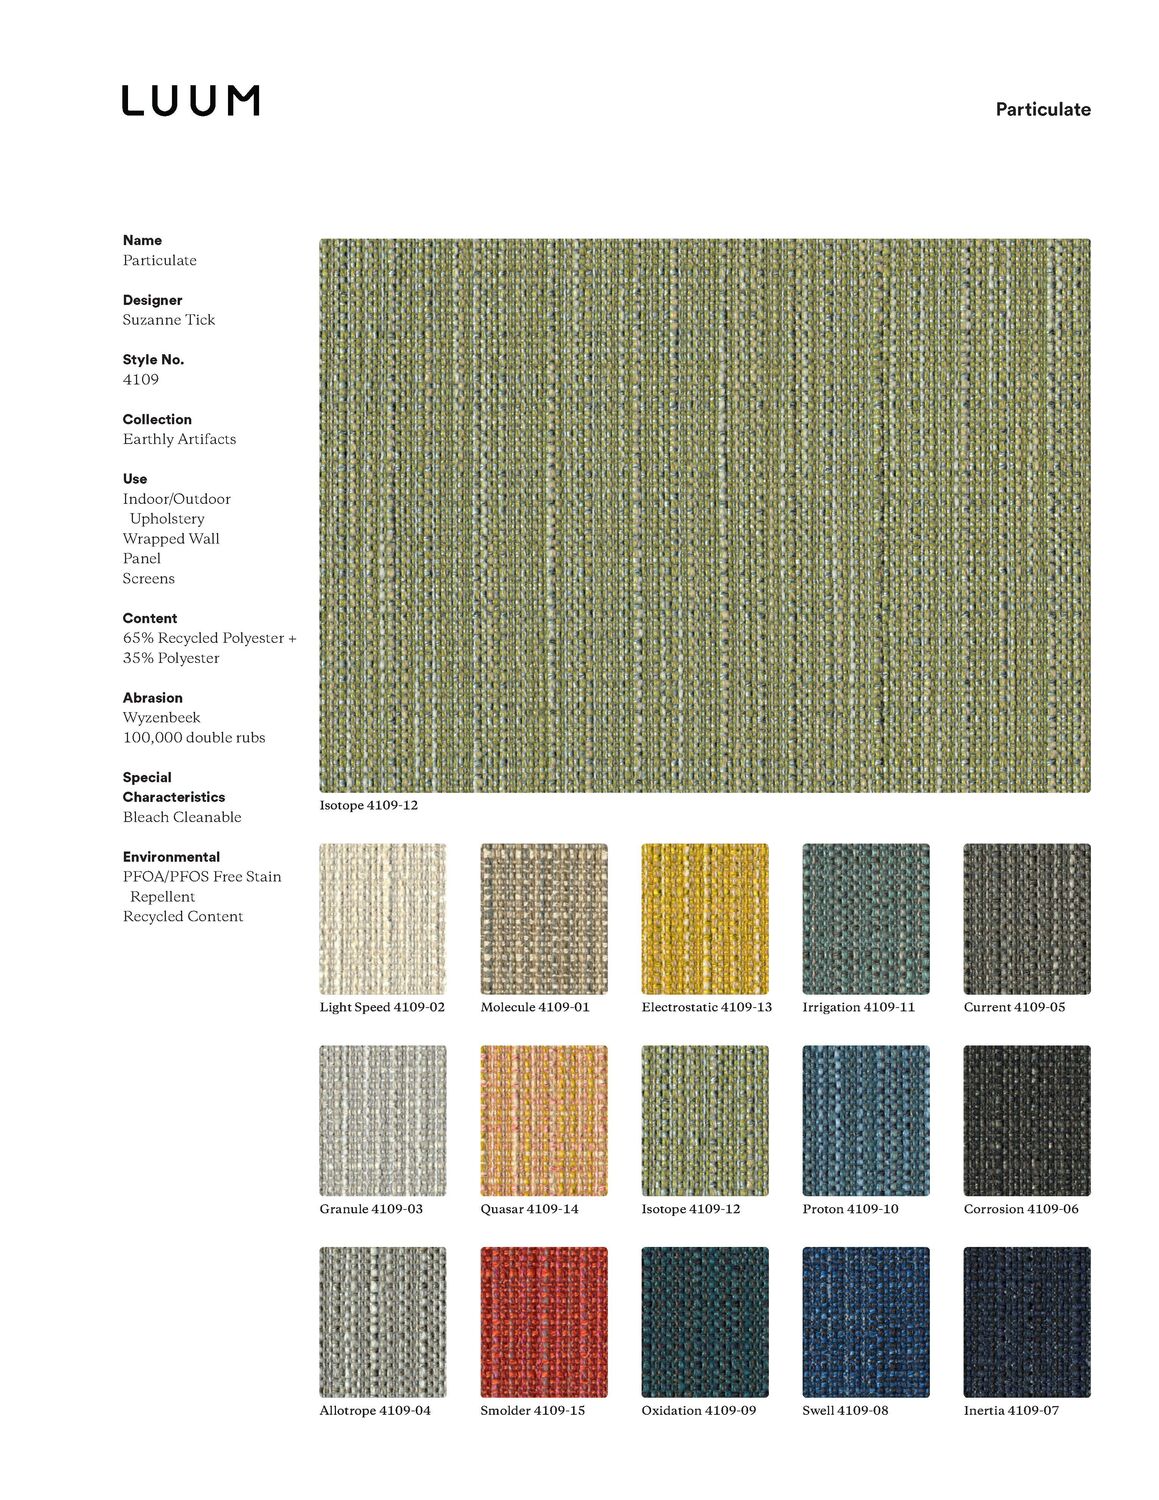 Particulate - Swell - 4109 - 08 - Half Yard Sample Card